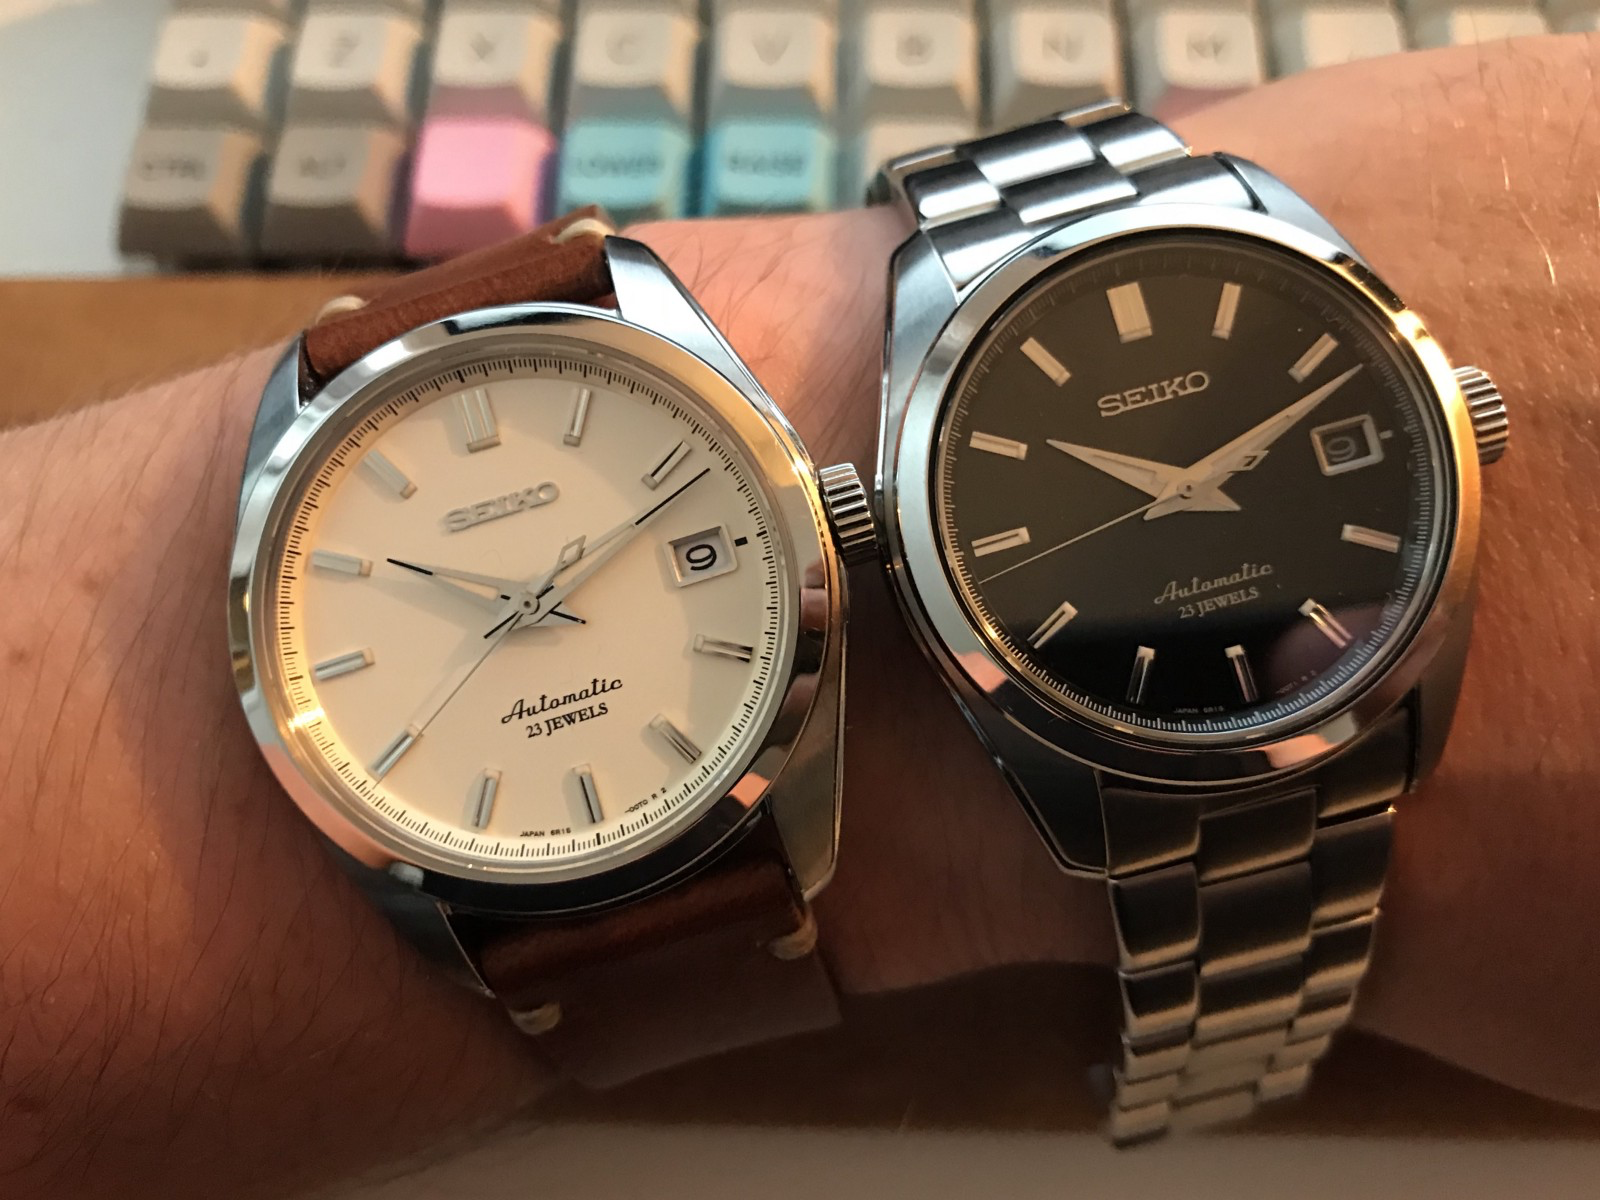 The affordable DateJust. A true classic | by AndEcho | Medium